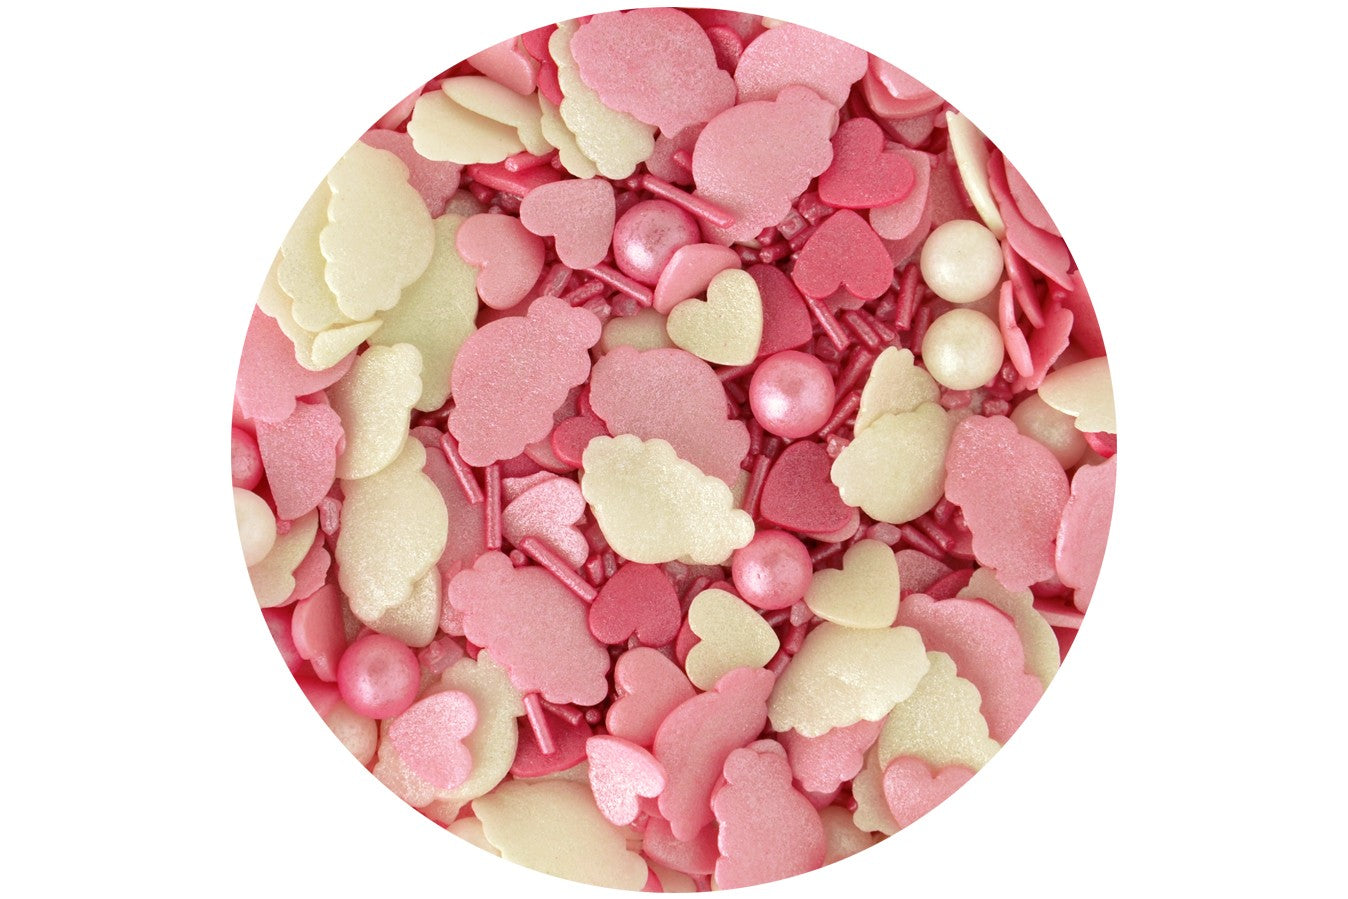 sprinkletti candy floss pink pretty edible sprinkles - The Cooks Cupboard Ltd